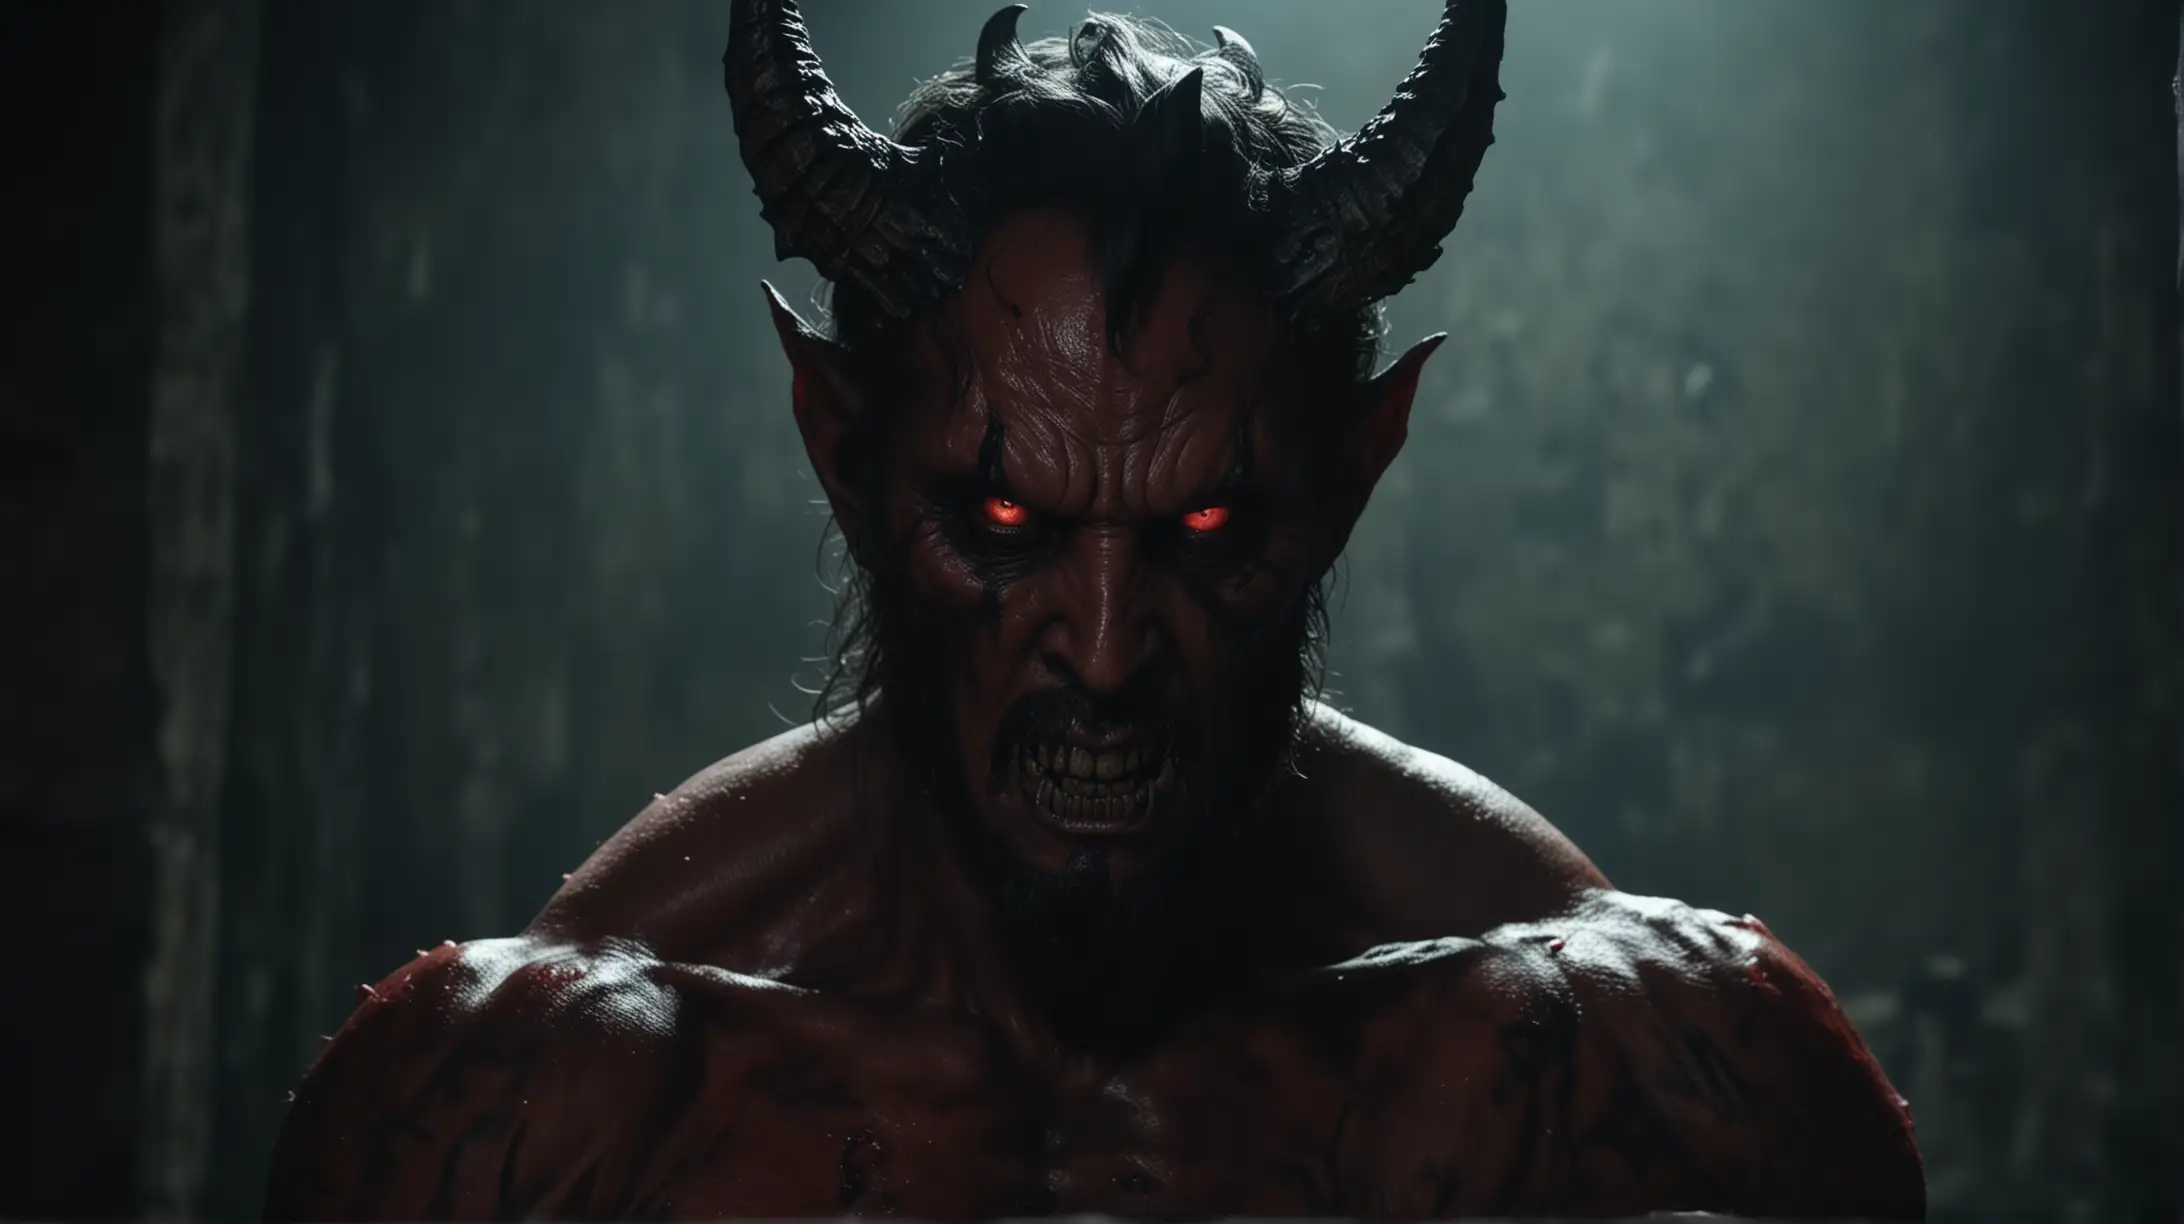 Sinister Devil CloseUp in High Definition